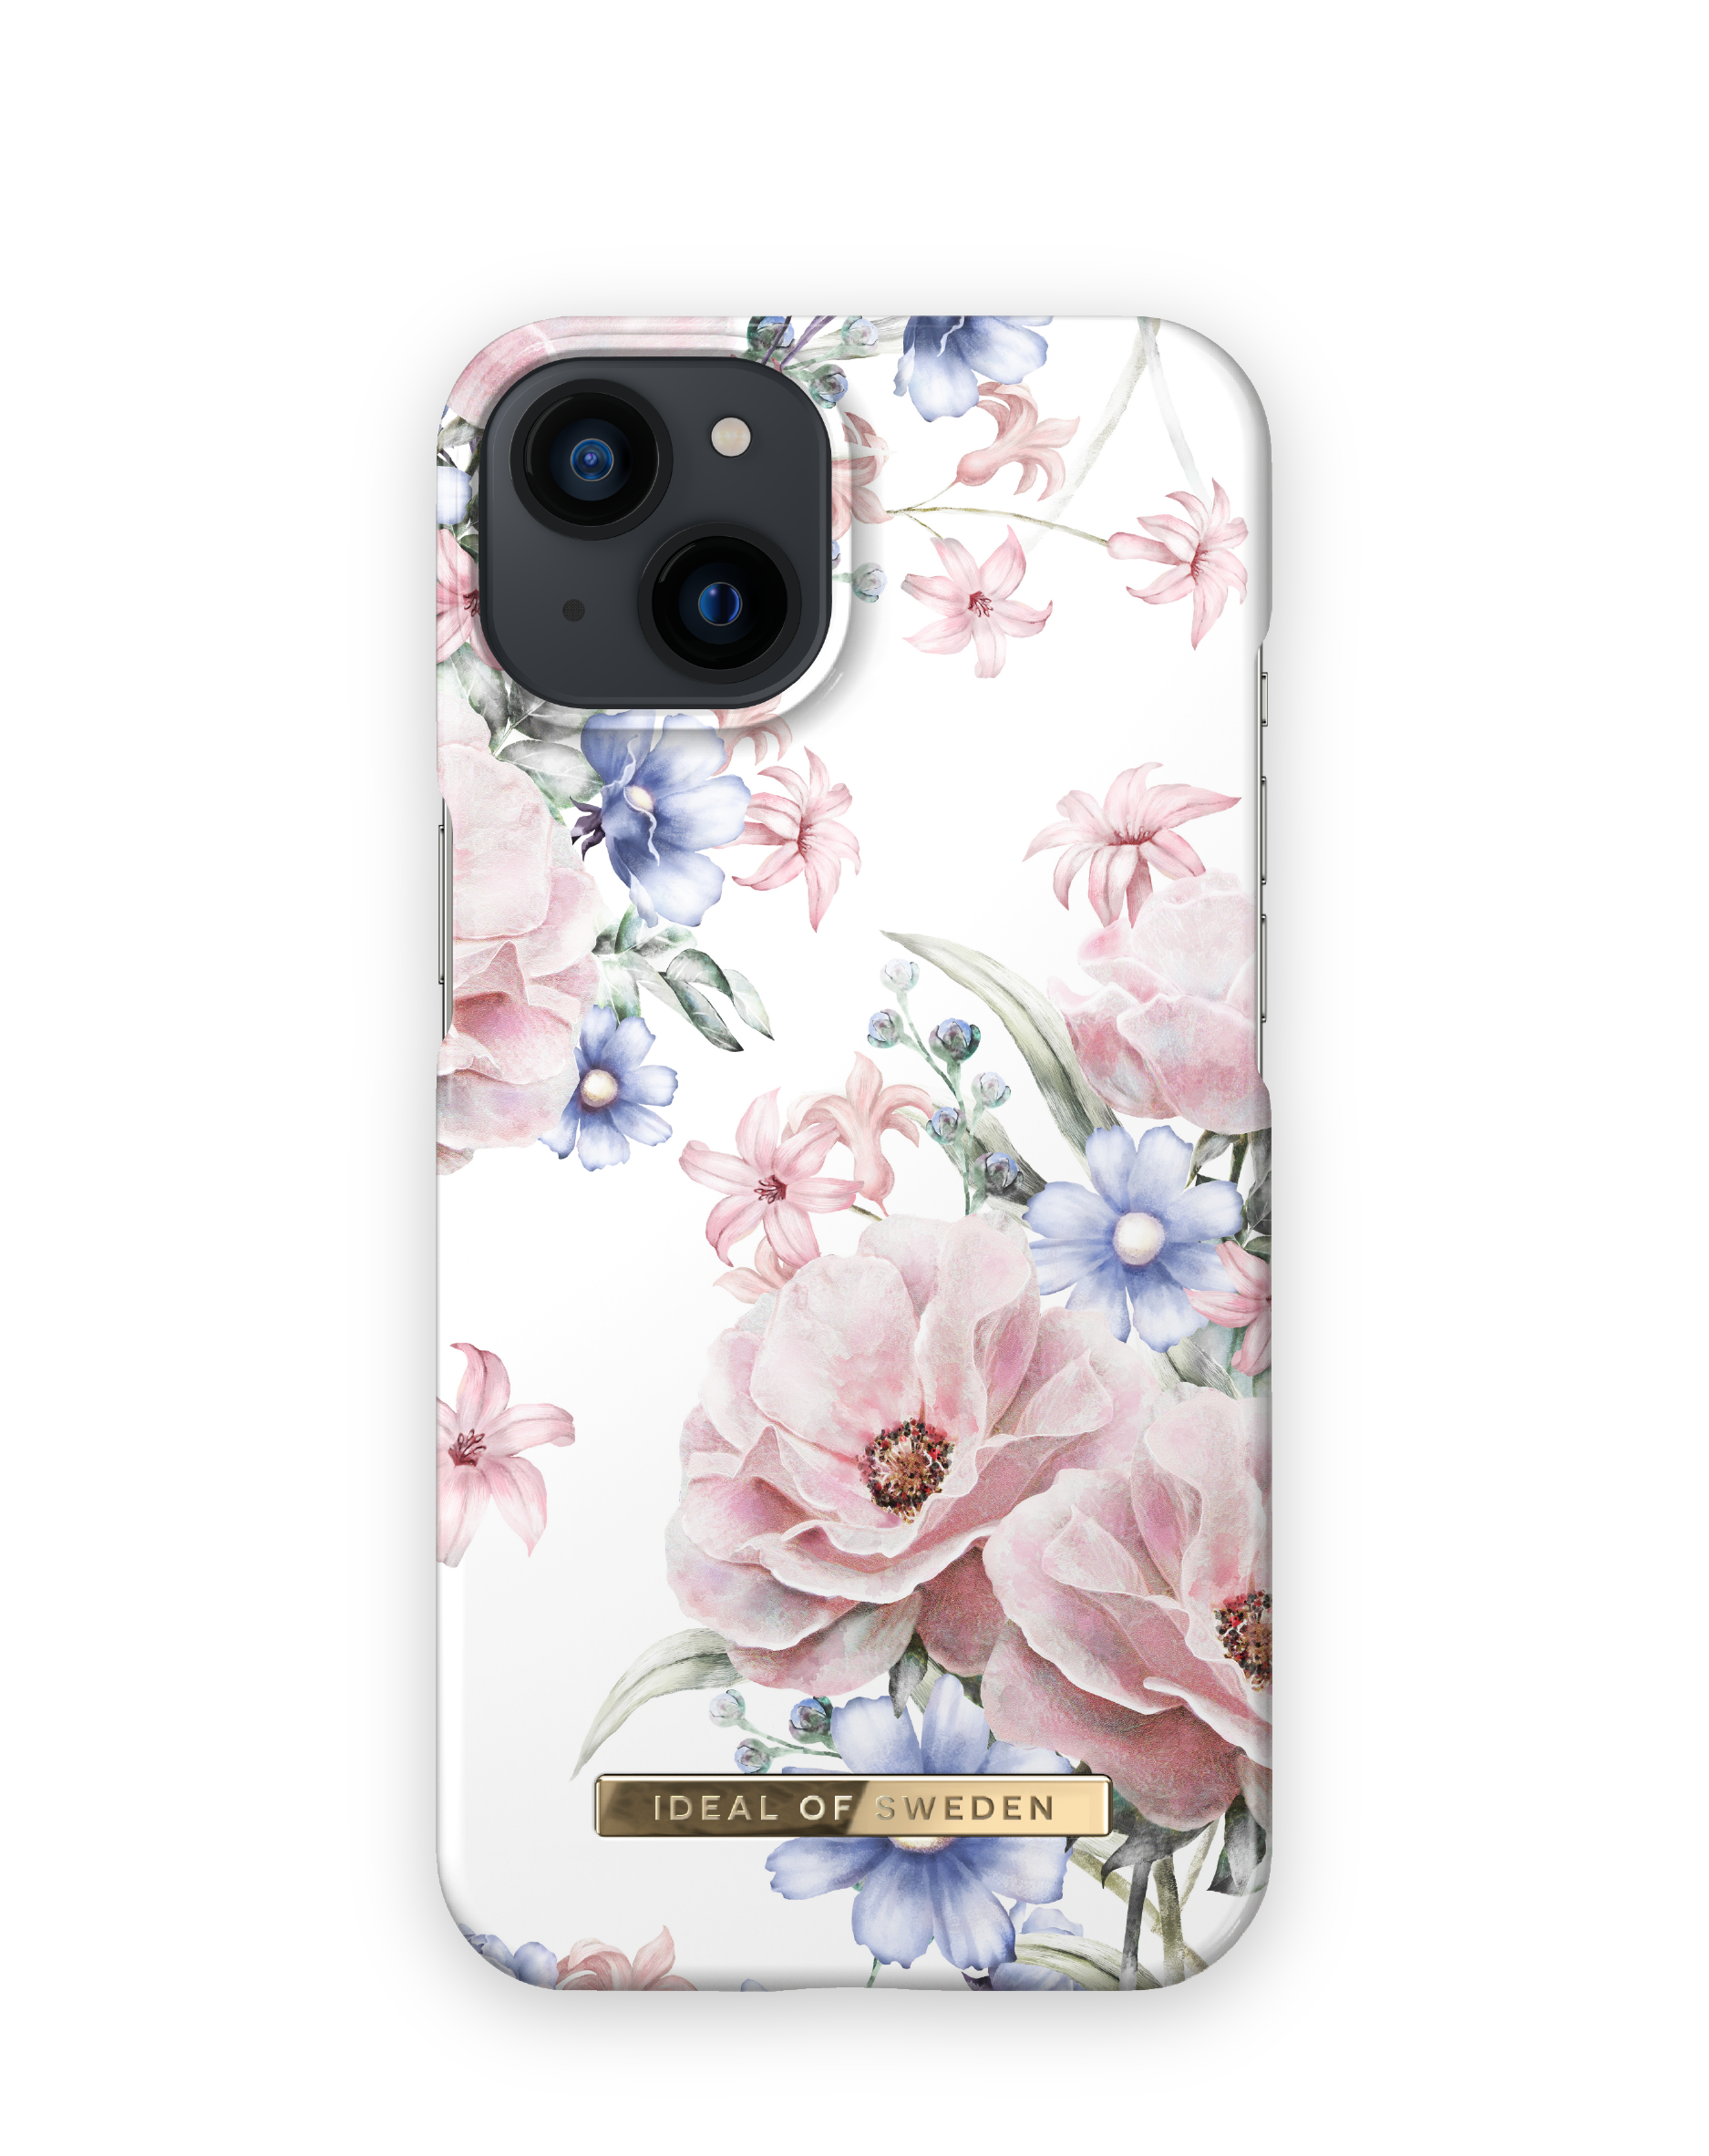 IDFCSS17-I2261-58, Apple, OF 13, iPhone IDEAL Romance Floral 14; Backcover, iPhone SWEDEN